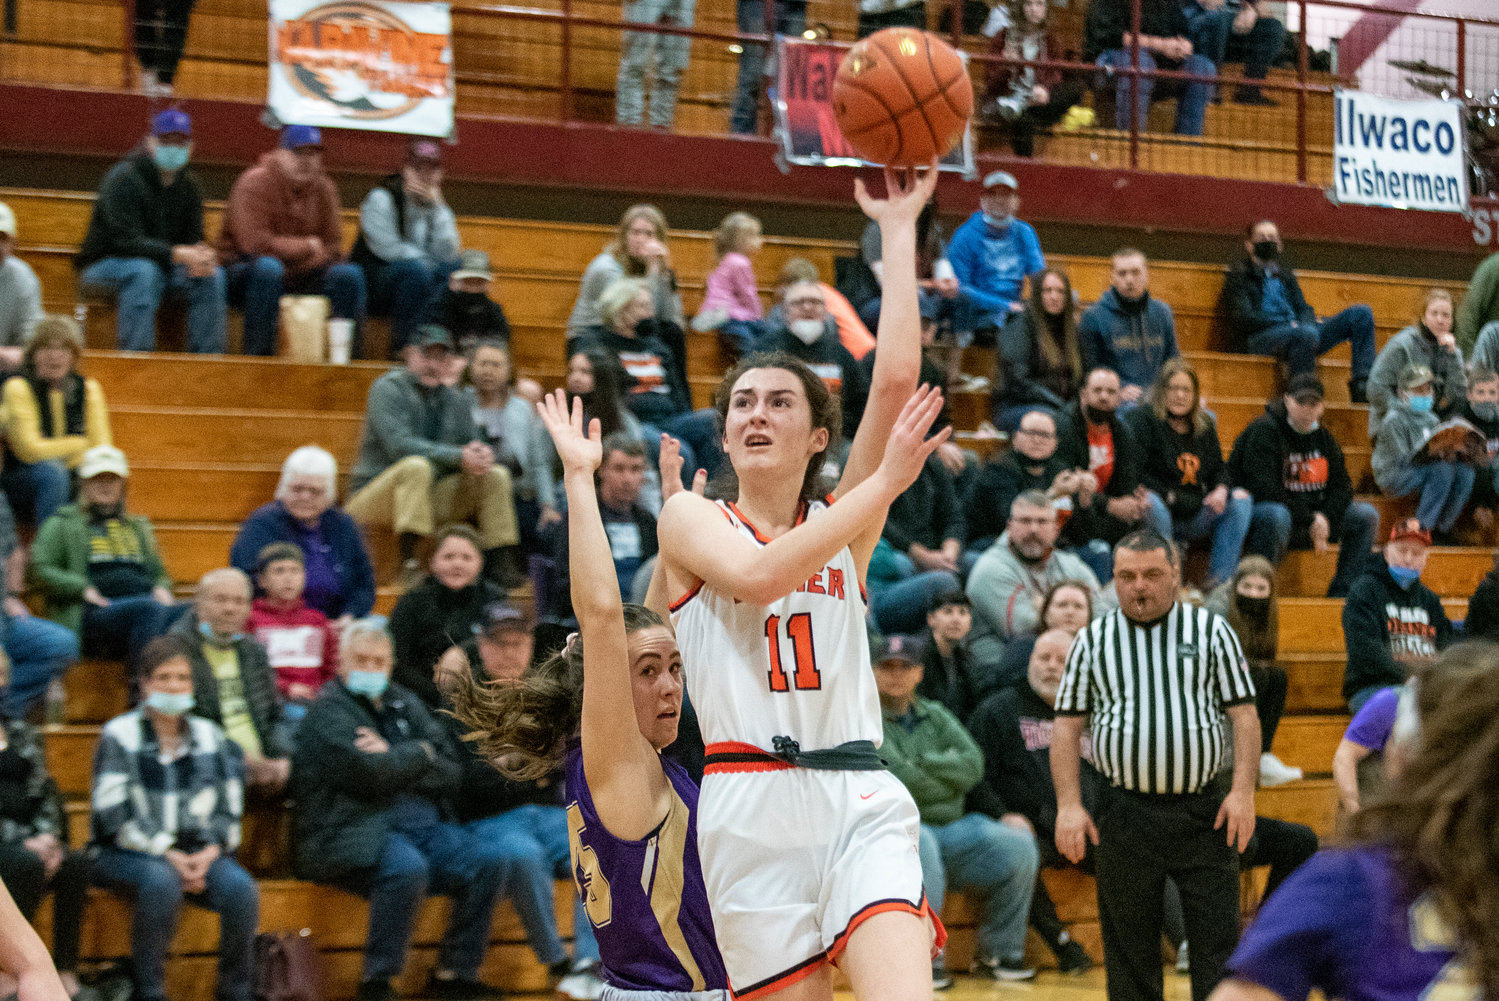 Rainier’s Faith Boesch drives for a floater against Onalaska in the district playoffs Feb. 19 at W.F. West High School.